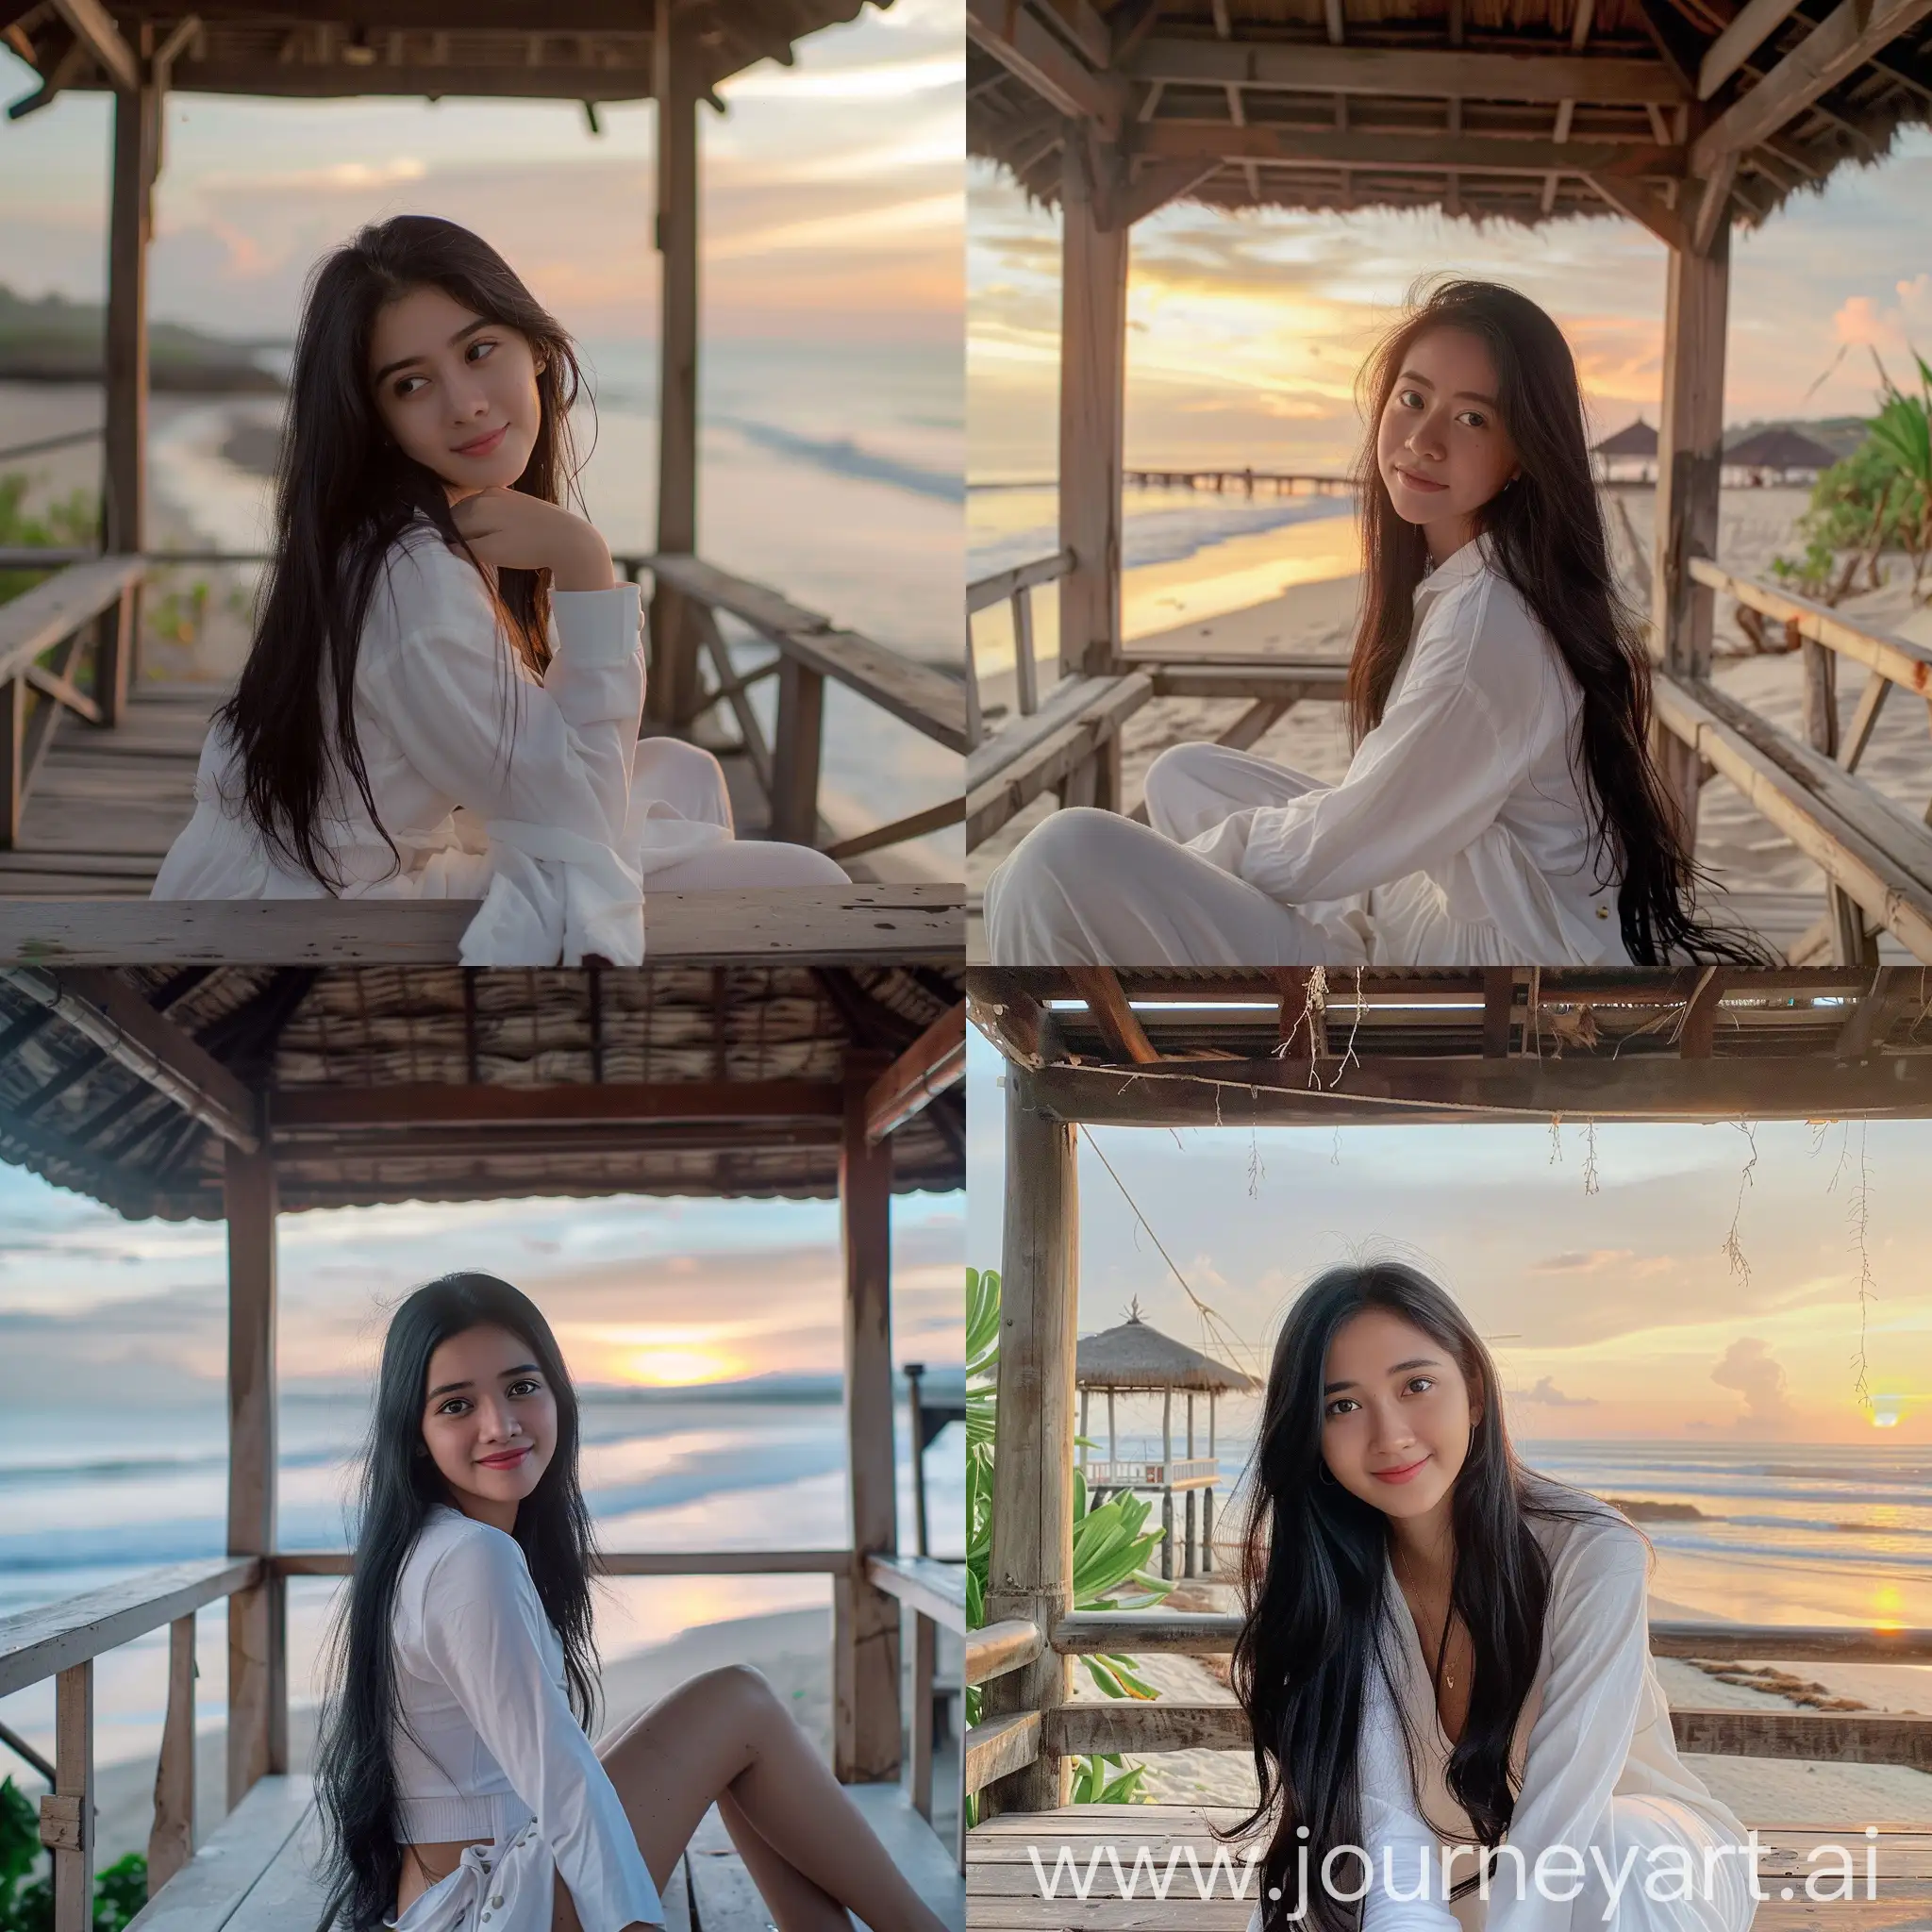 Indonesian-Girl-in-White-Casual-Clothes-on-Beach-Gazebo-at-Sunset